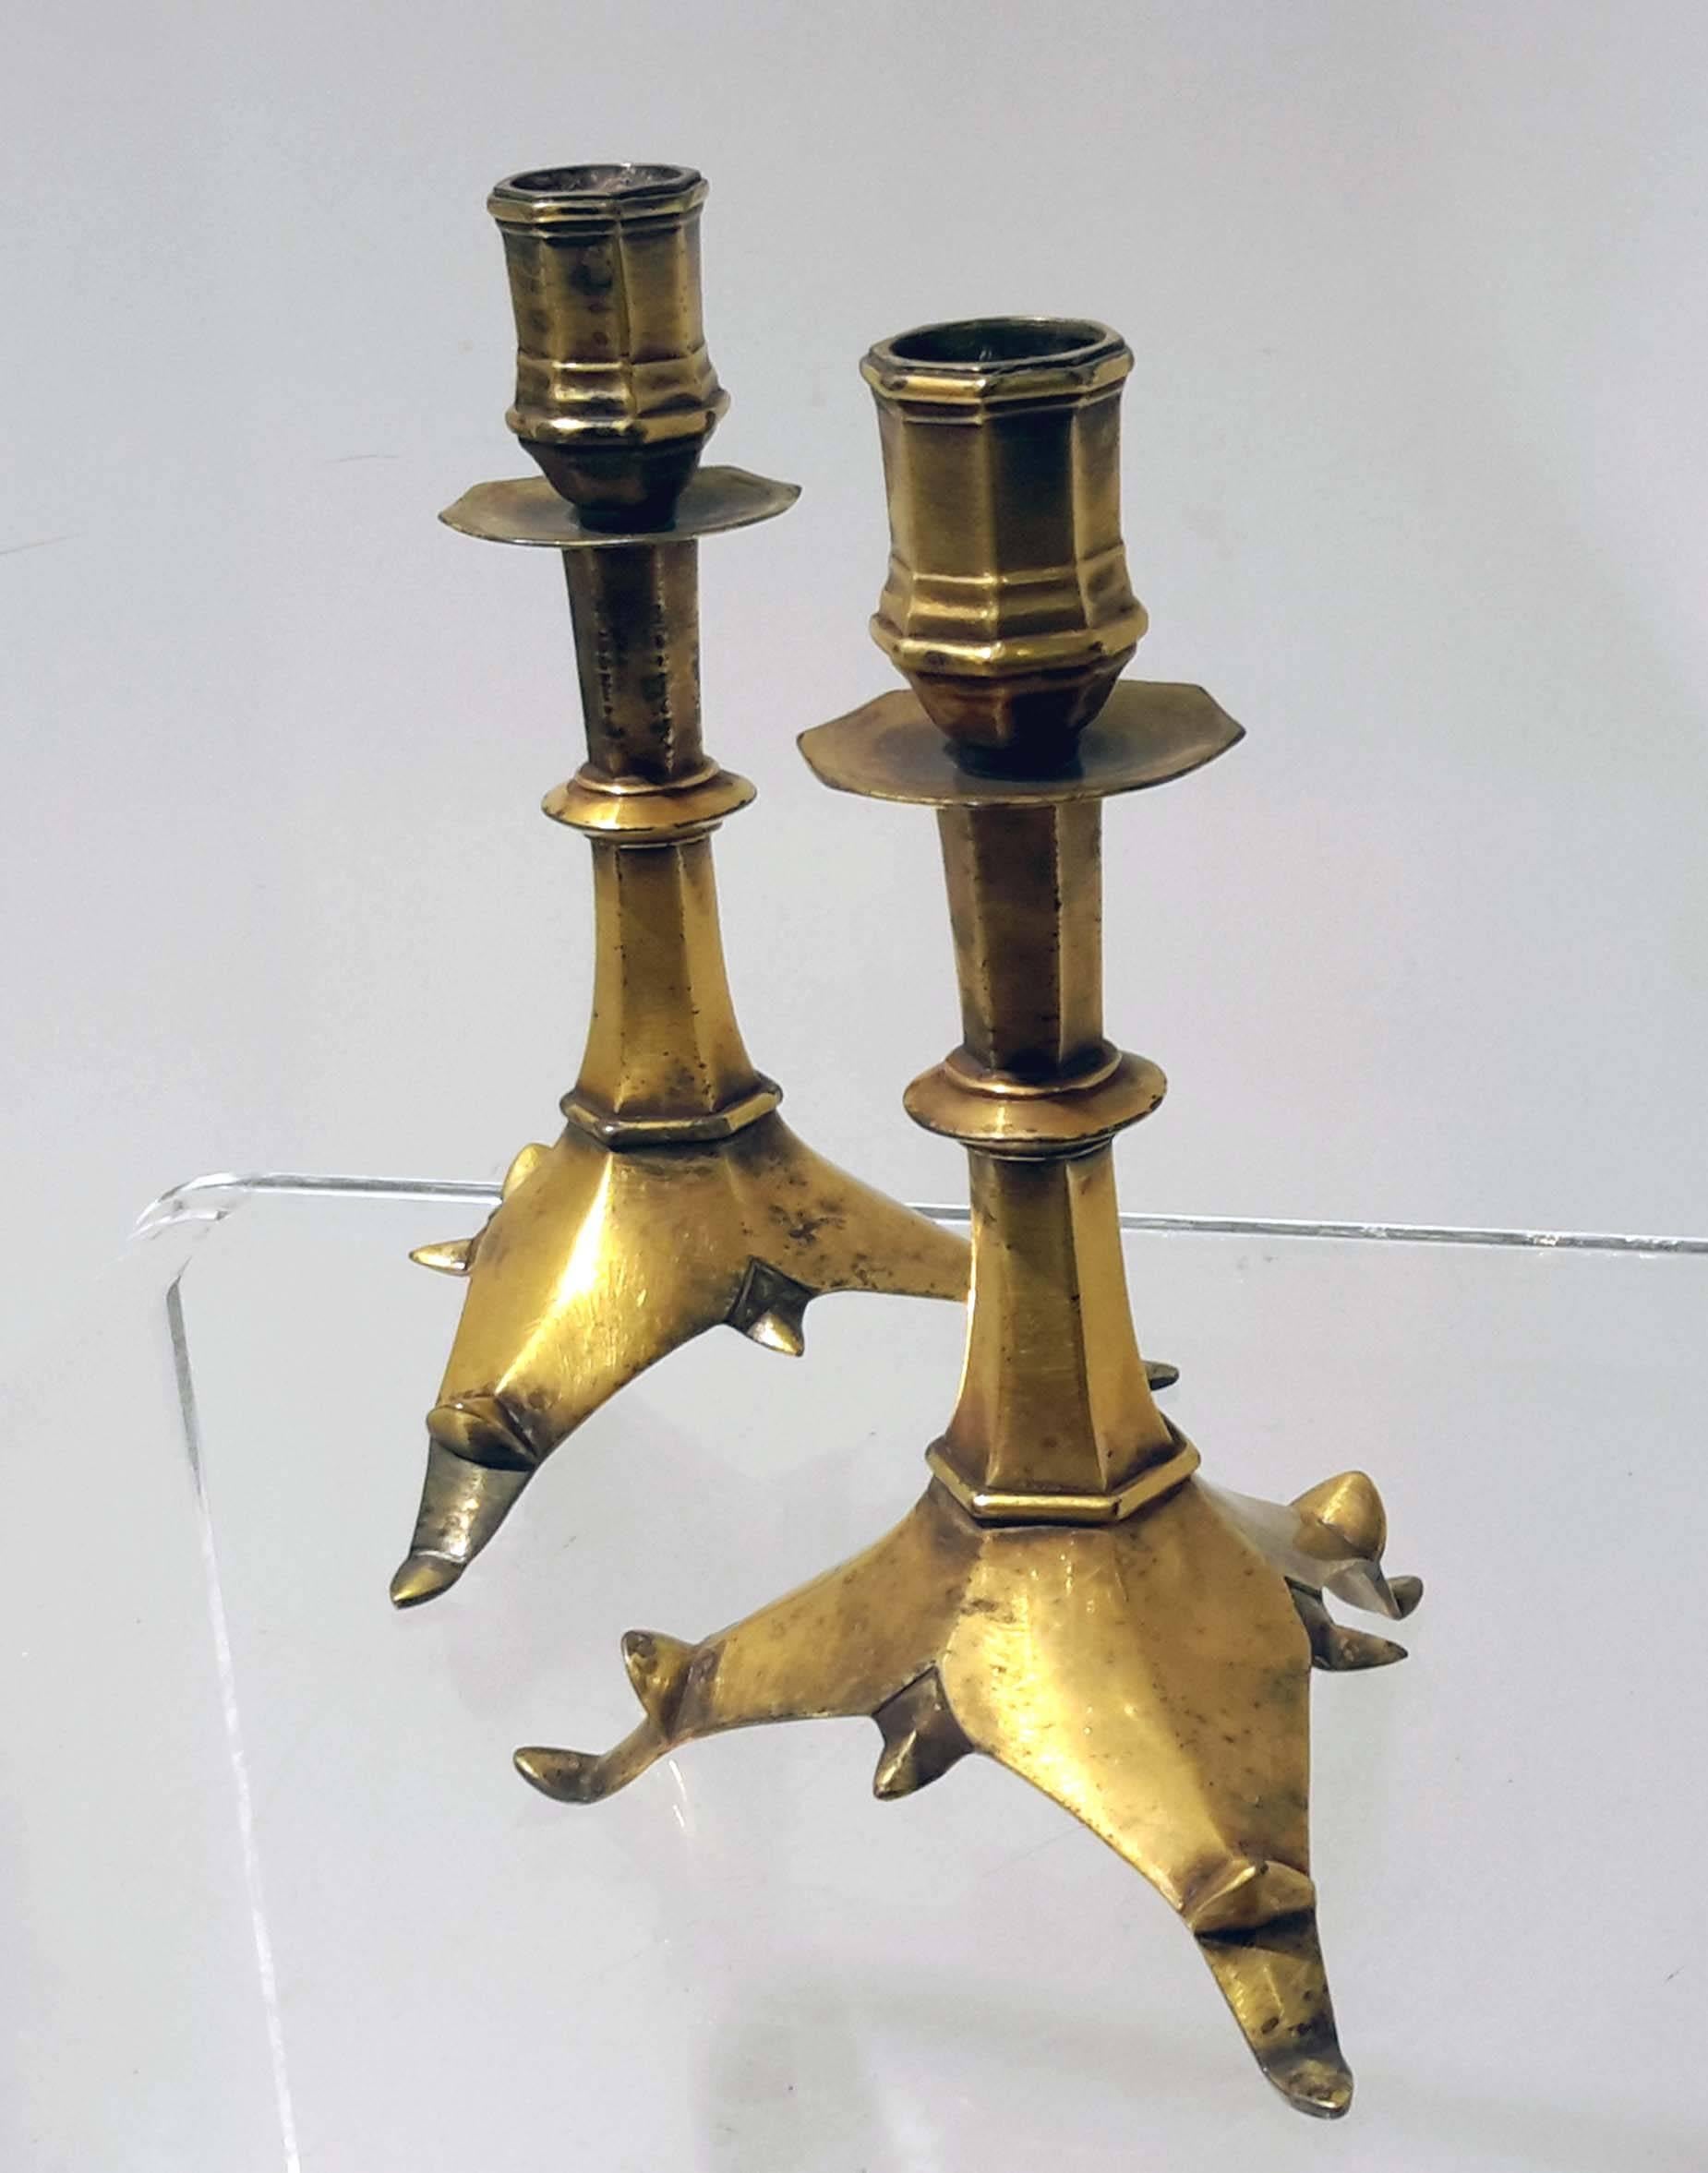 Gilt Pair of French Gothic Candlesticks Retailed by Tiffany & Co., 19th Century